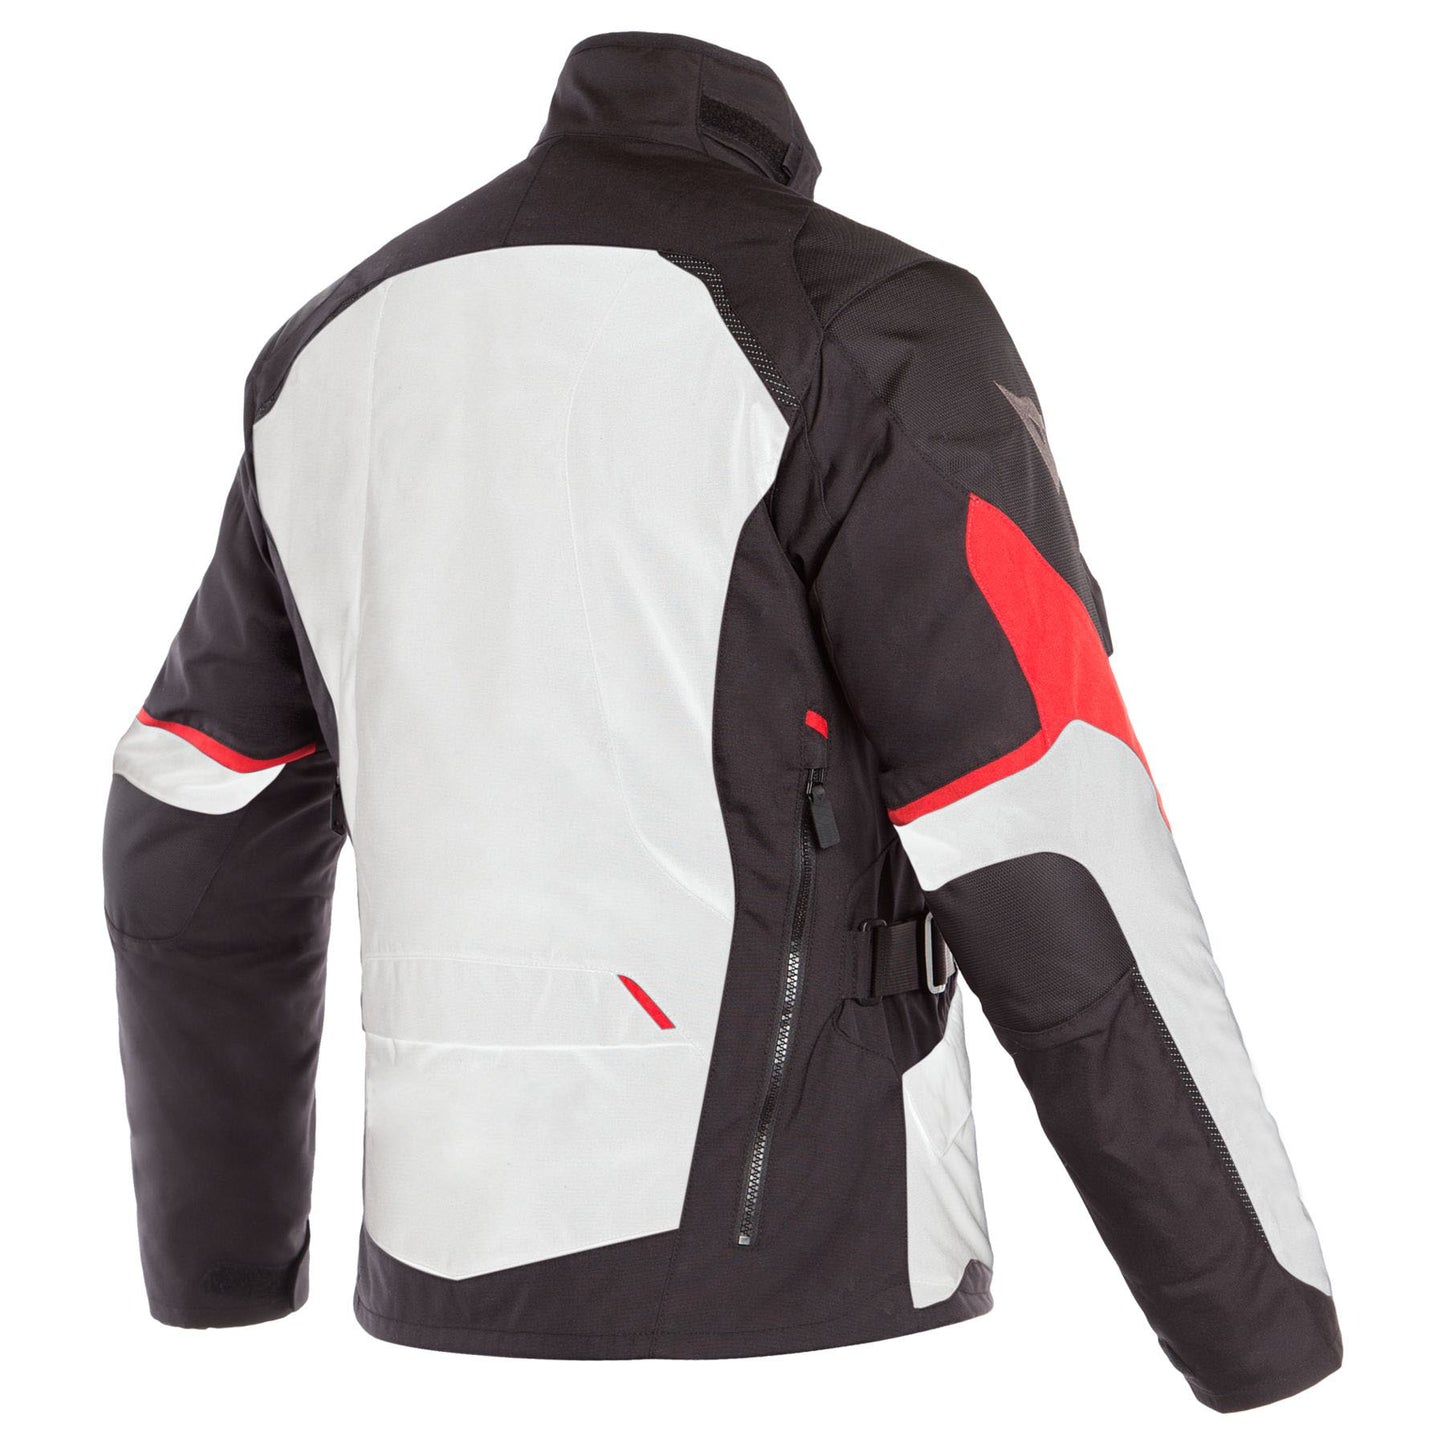 Waterproof Textile Touring Jacket With CE Armor Inside Air Vent Pocket